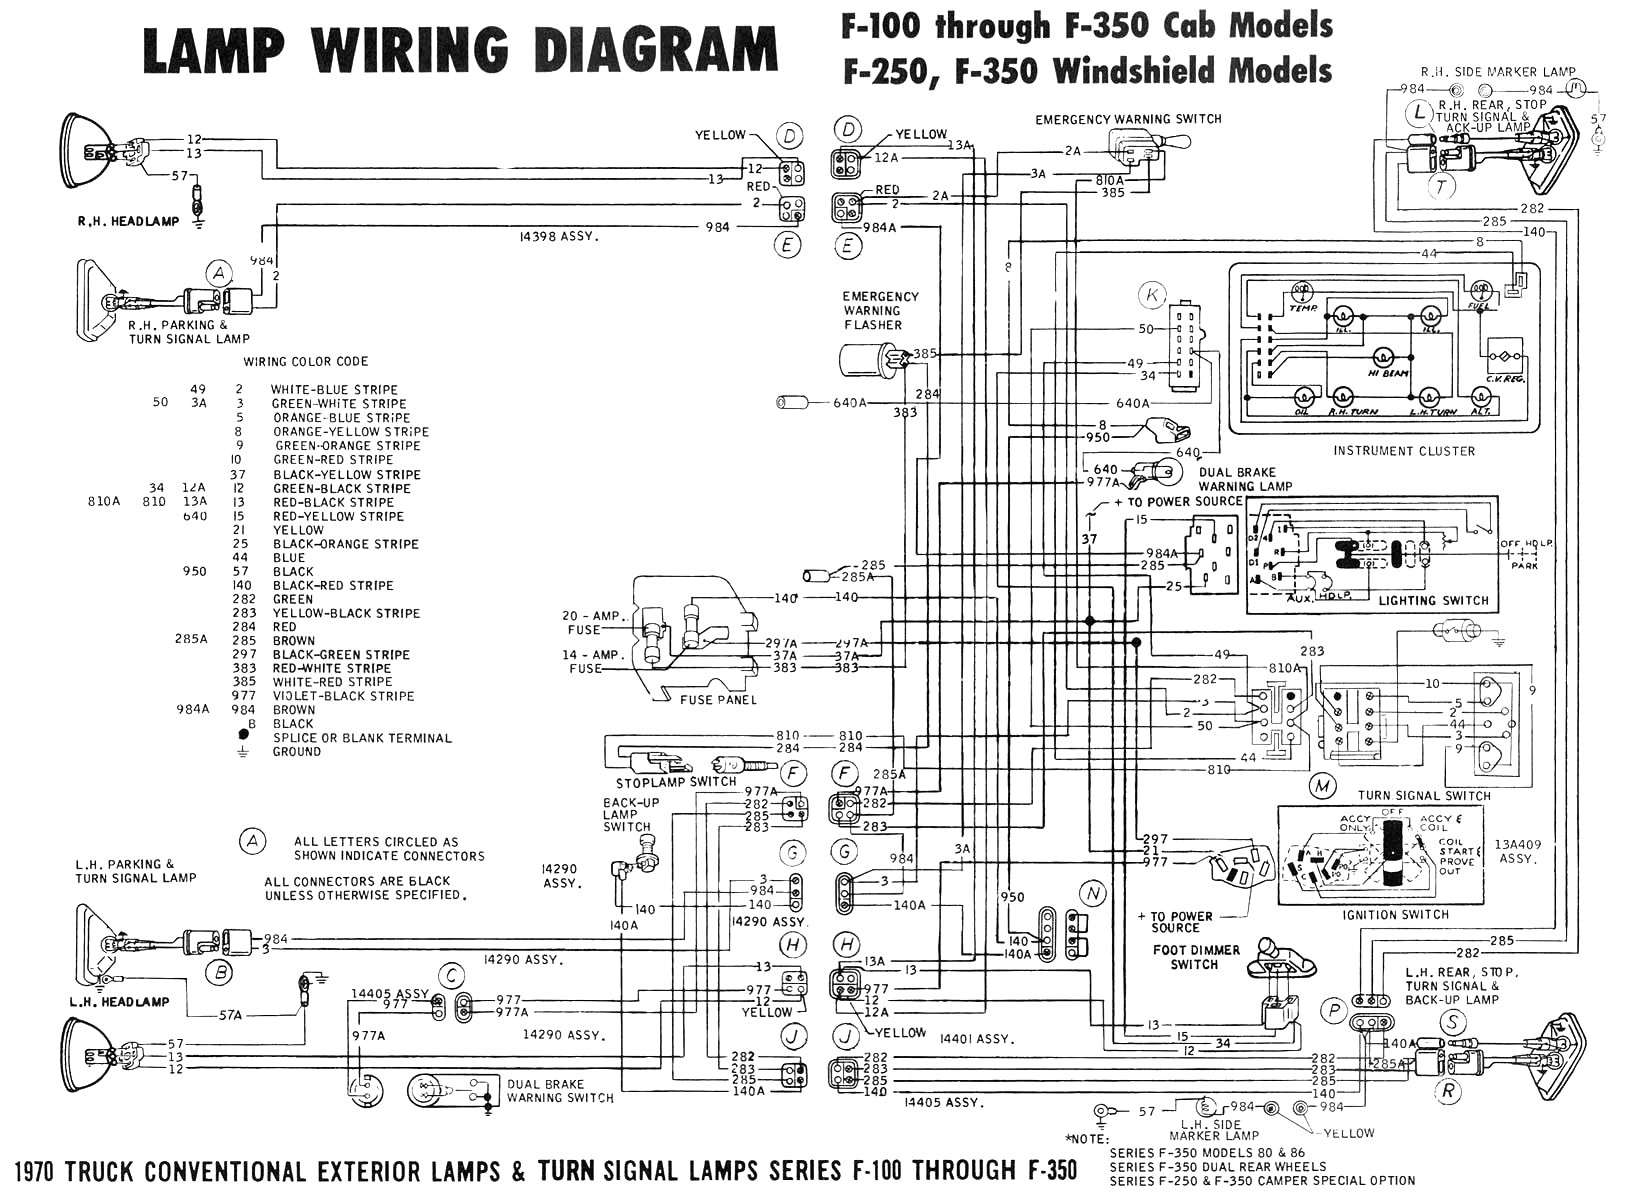 51 ford tail light wiring diagram wiring diagram today wiring diagram 1955 ford 3 way switch get free image about wiring